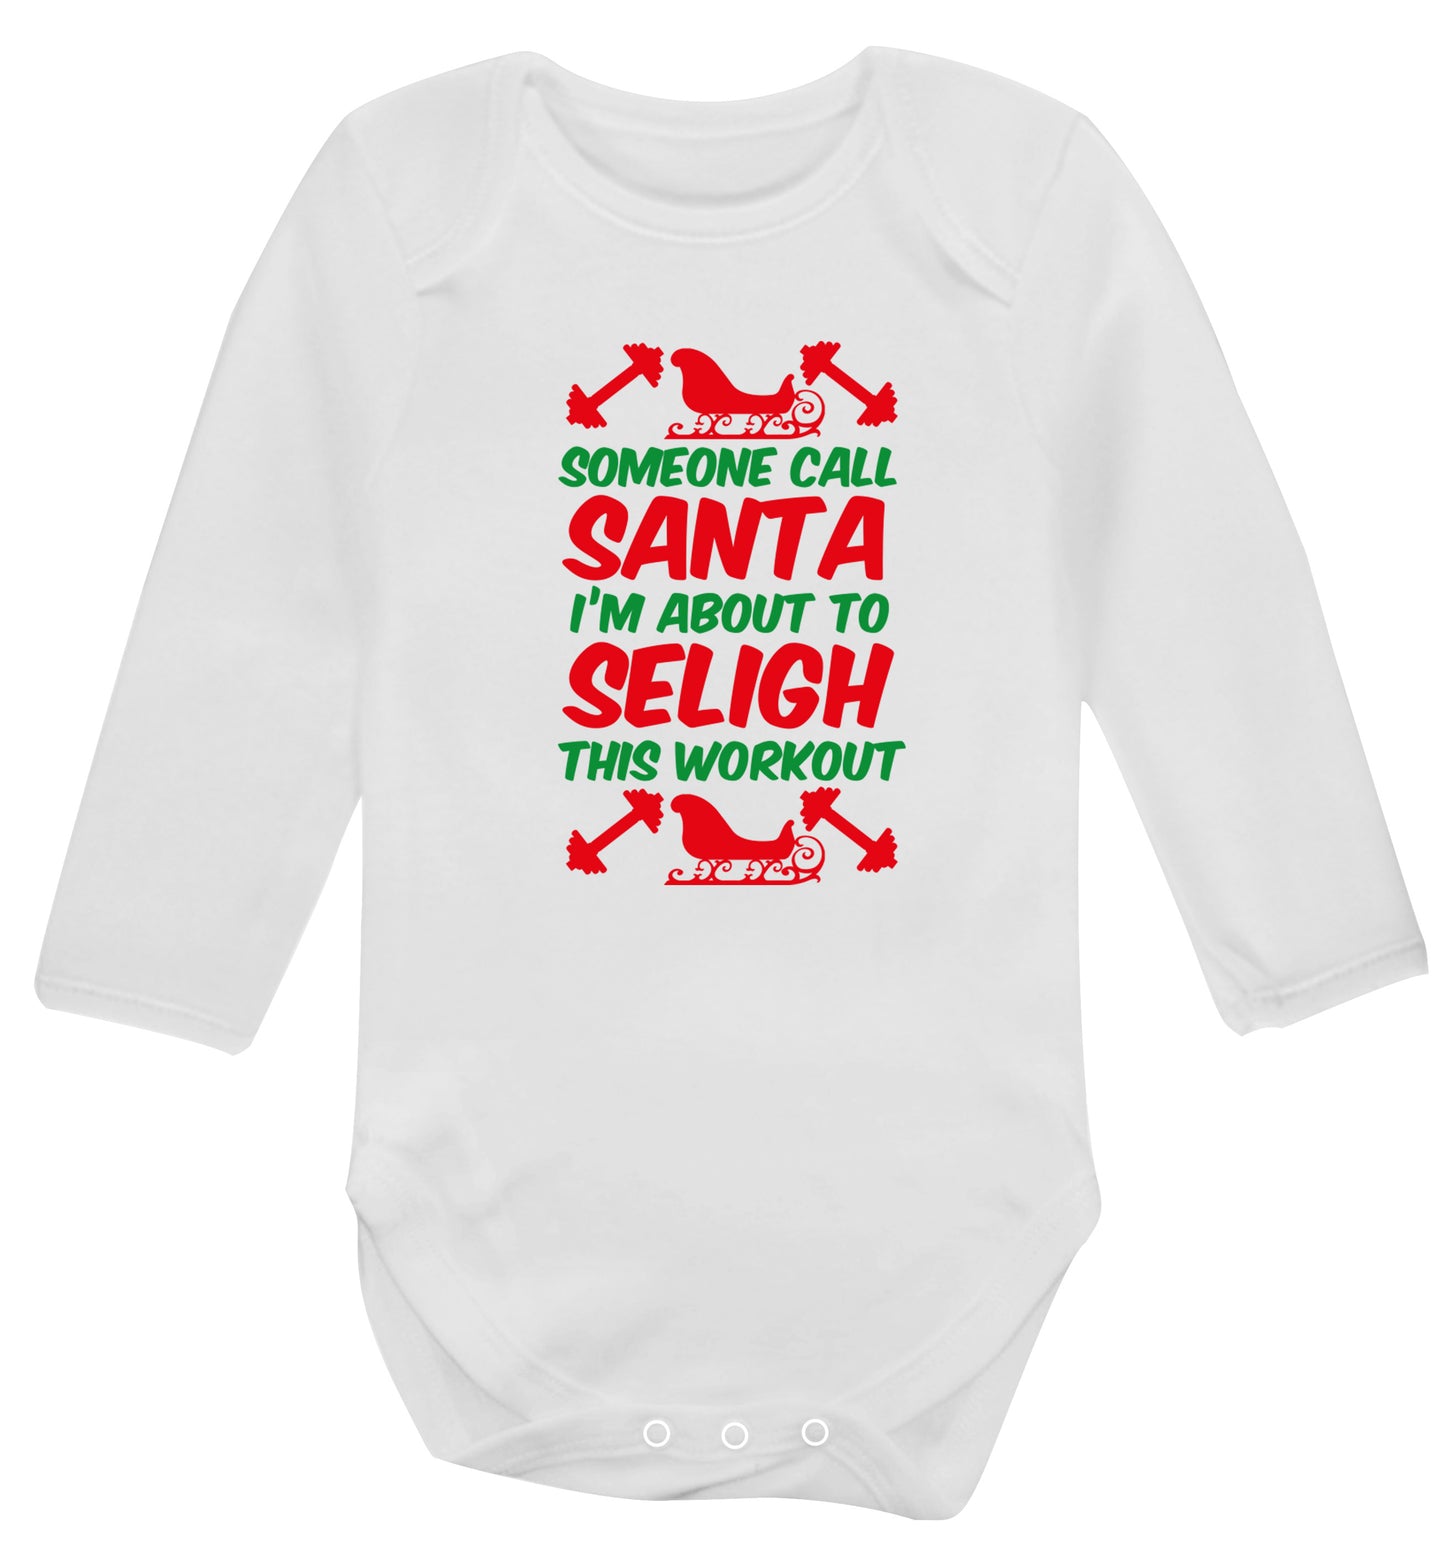 Someone call santa, I'm about to sleigh this workout Baby Vest long sleeved white 6-12 months